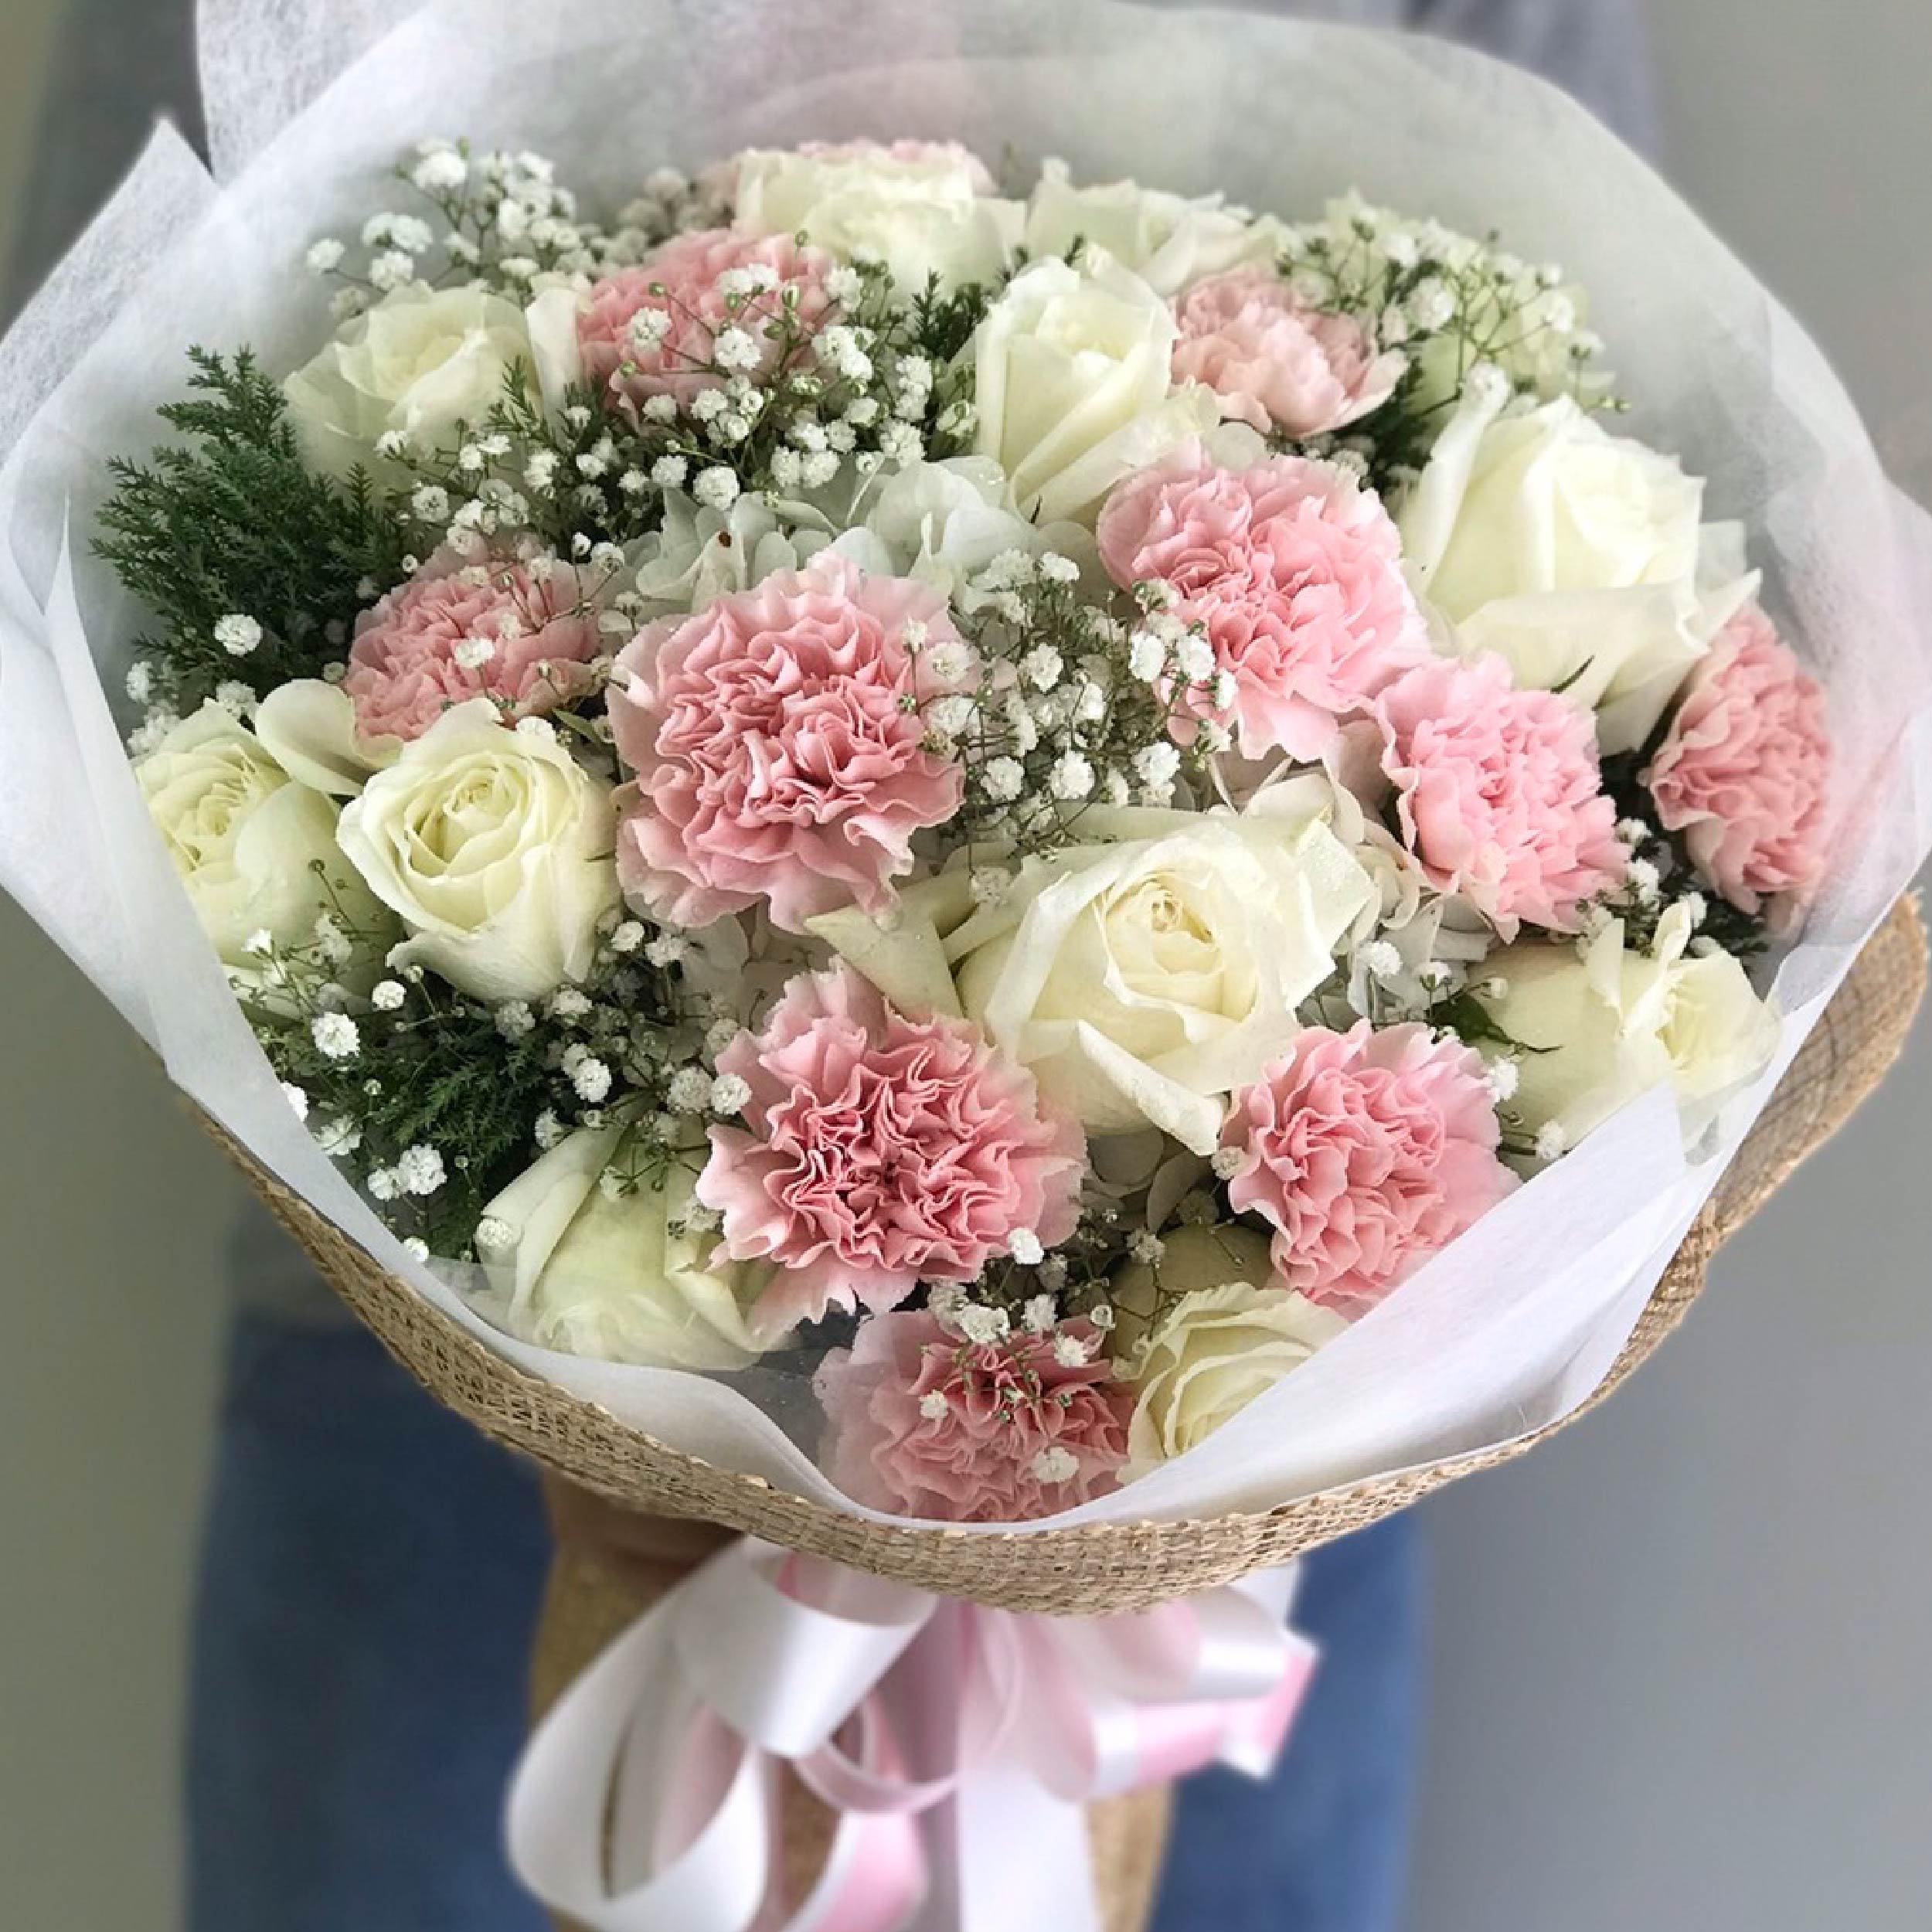 "The One and Only" Bouquet of pink carnations, white roses